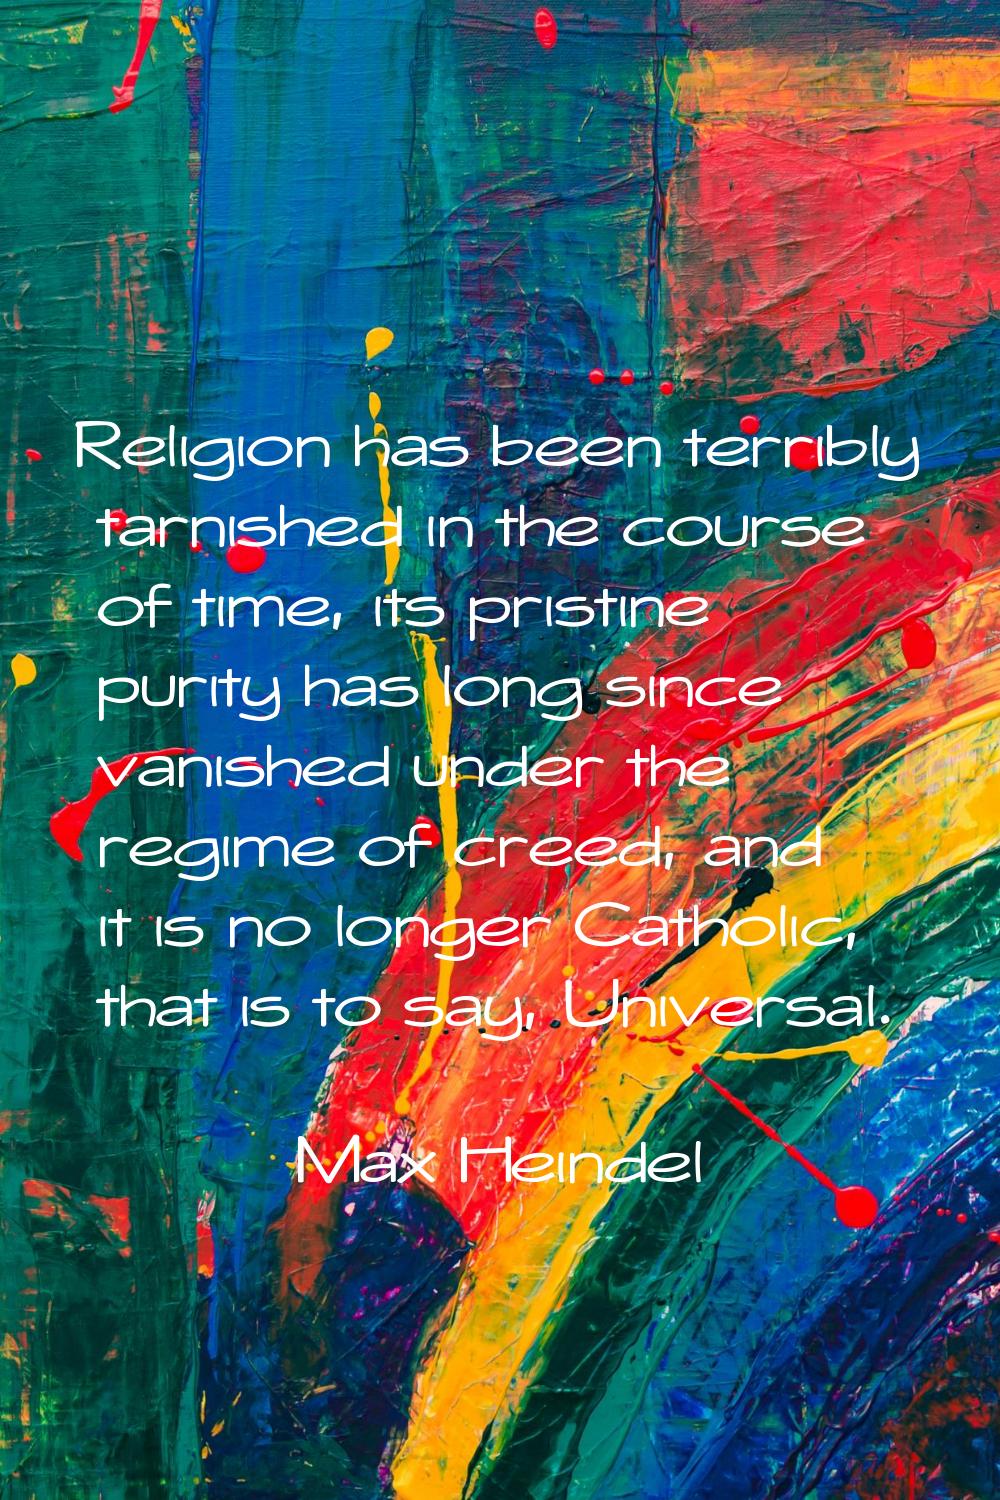 Religion has been terribly tarnished in the course of time, its pristine purity has long since vani